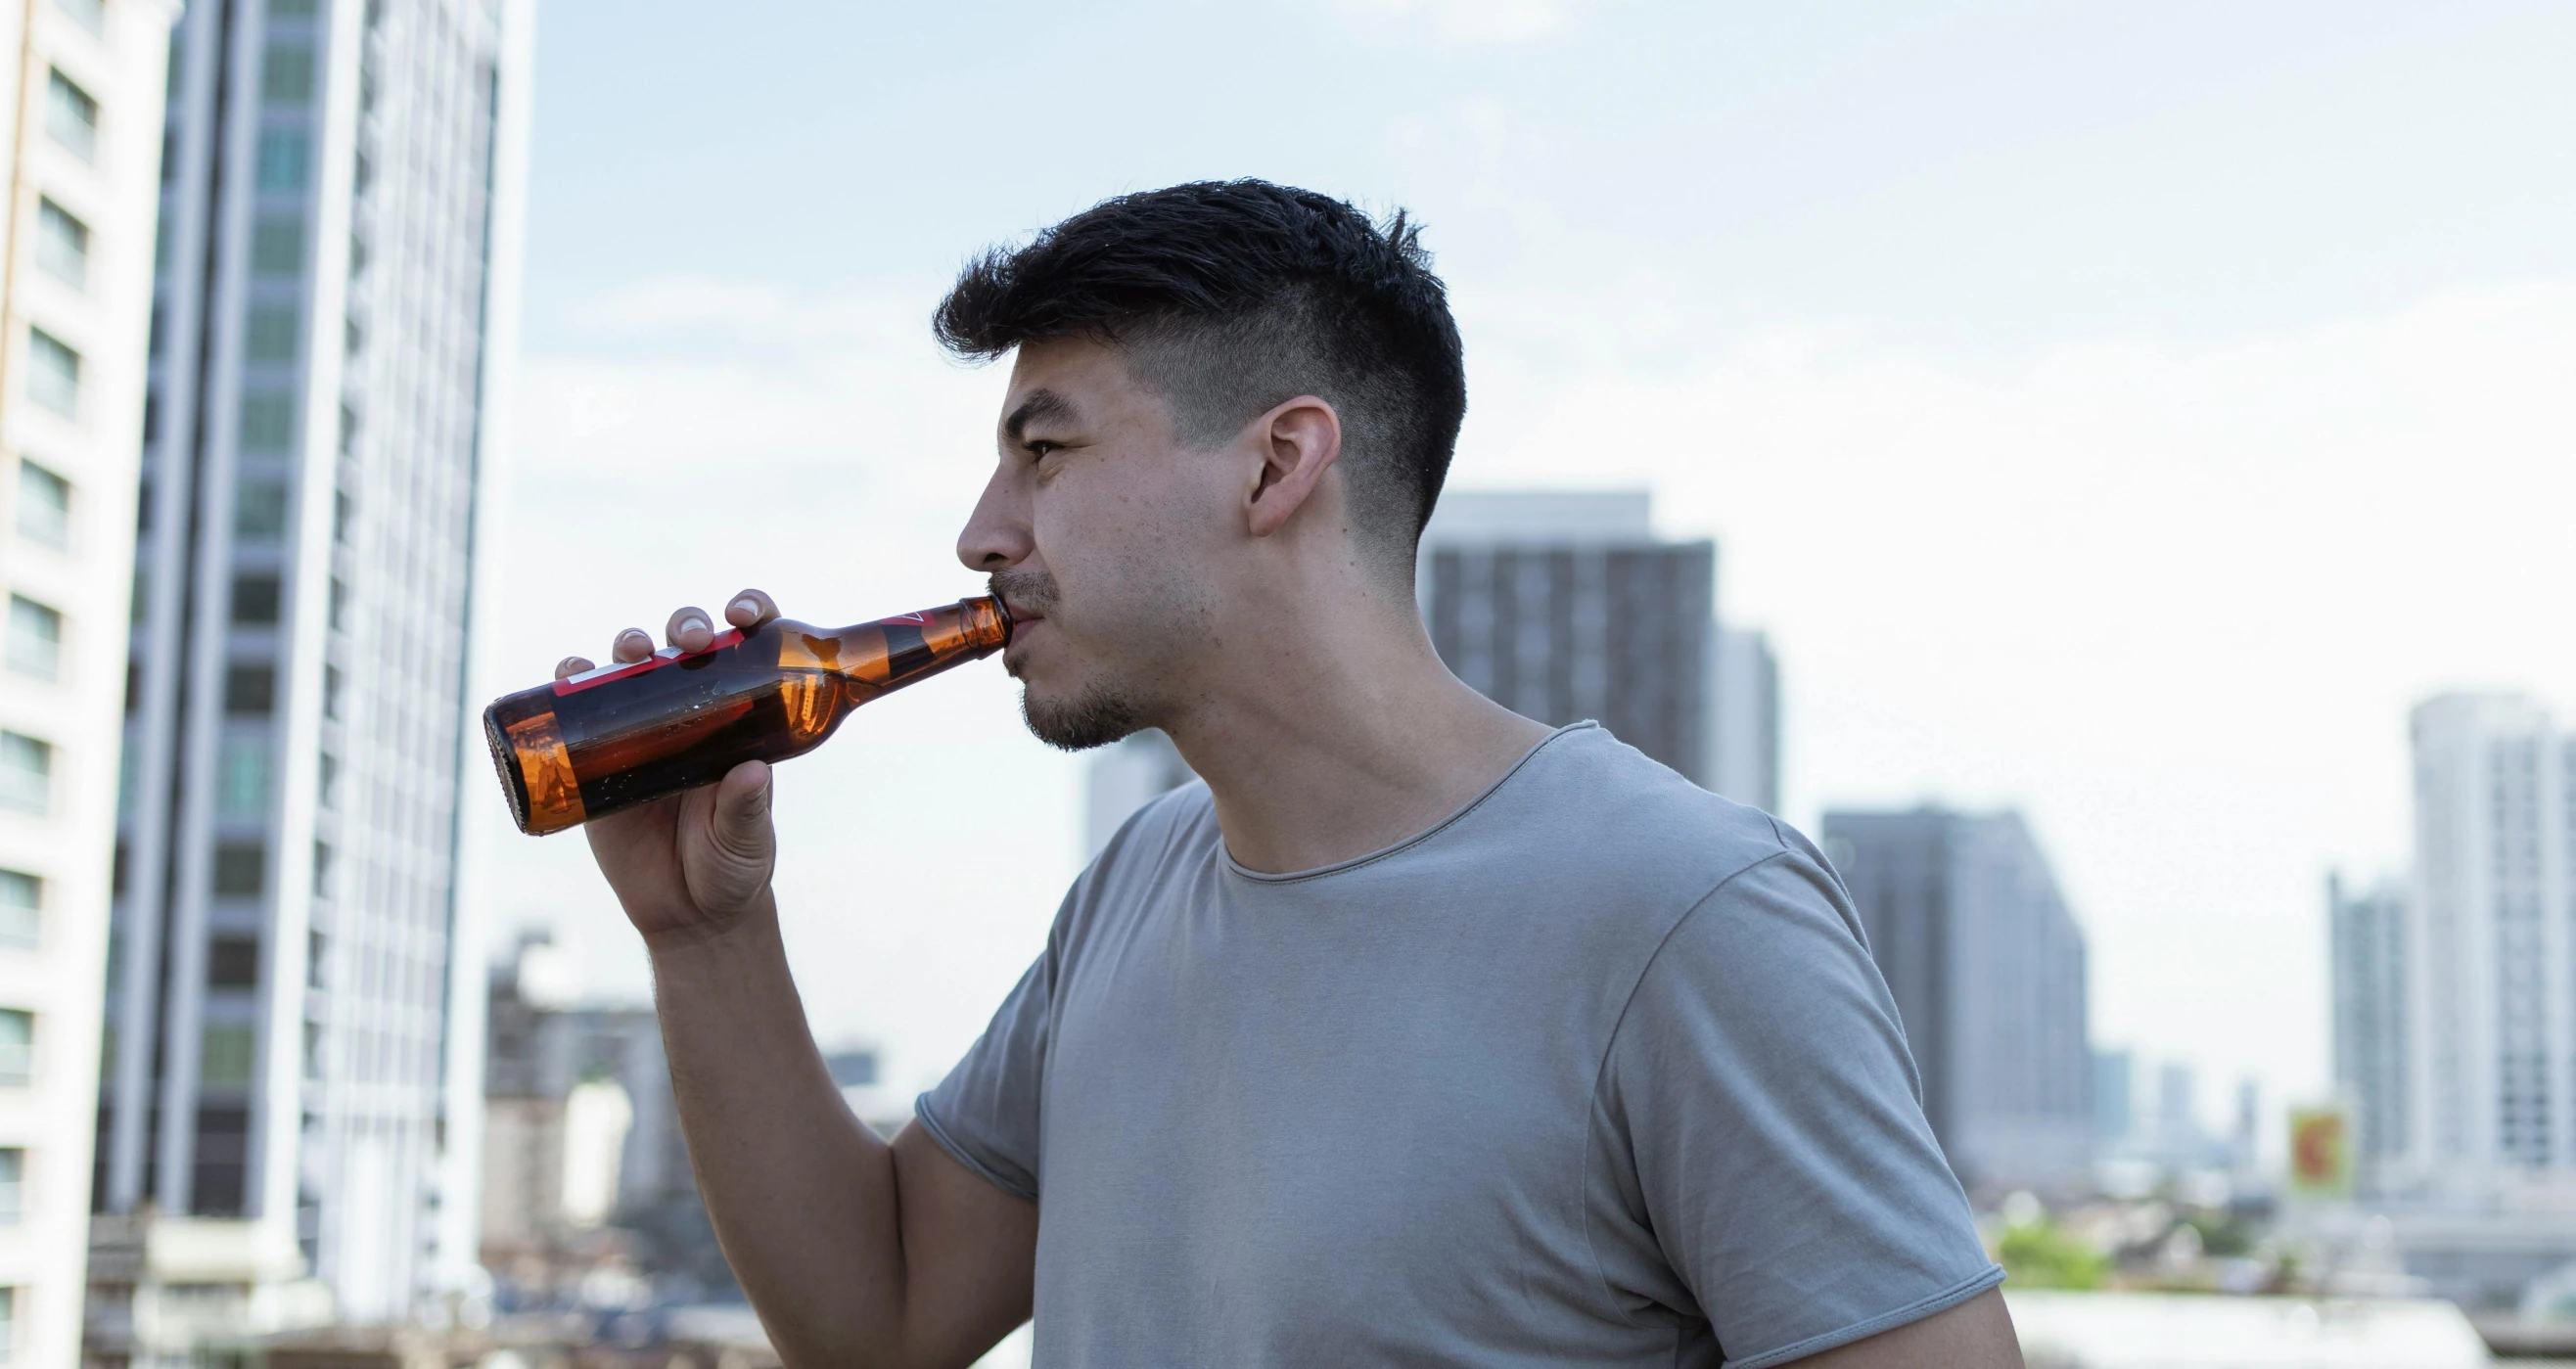 a man is drinking from a beer bottle, pexels contest winner, happening, urban in background, profile image, looking to the side off camera, brown